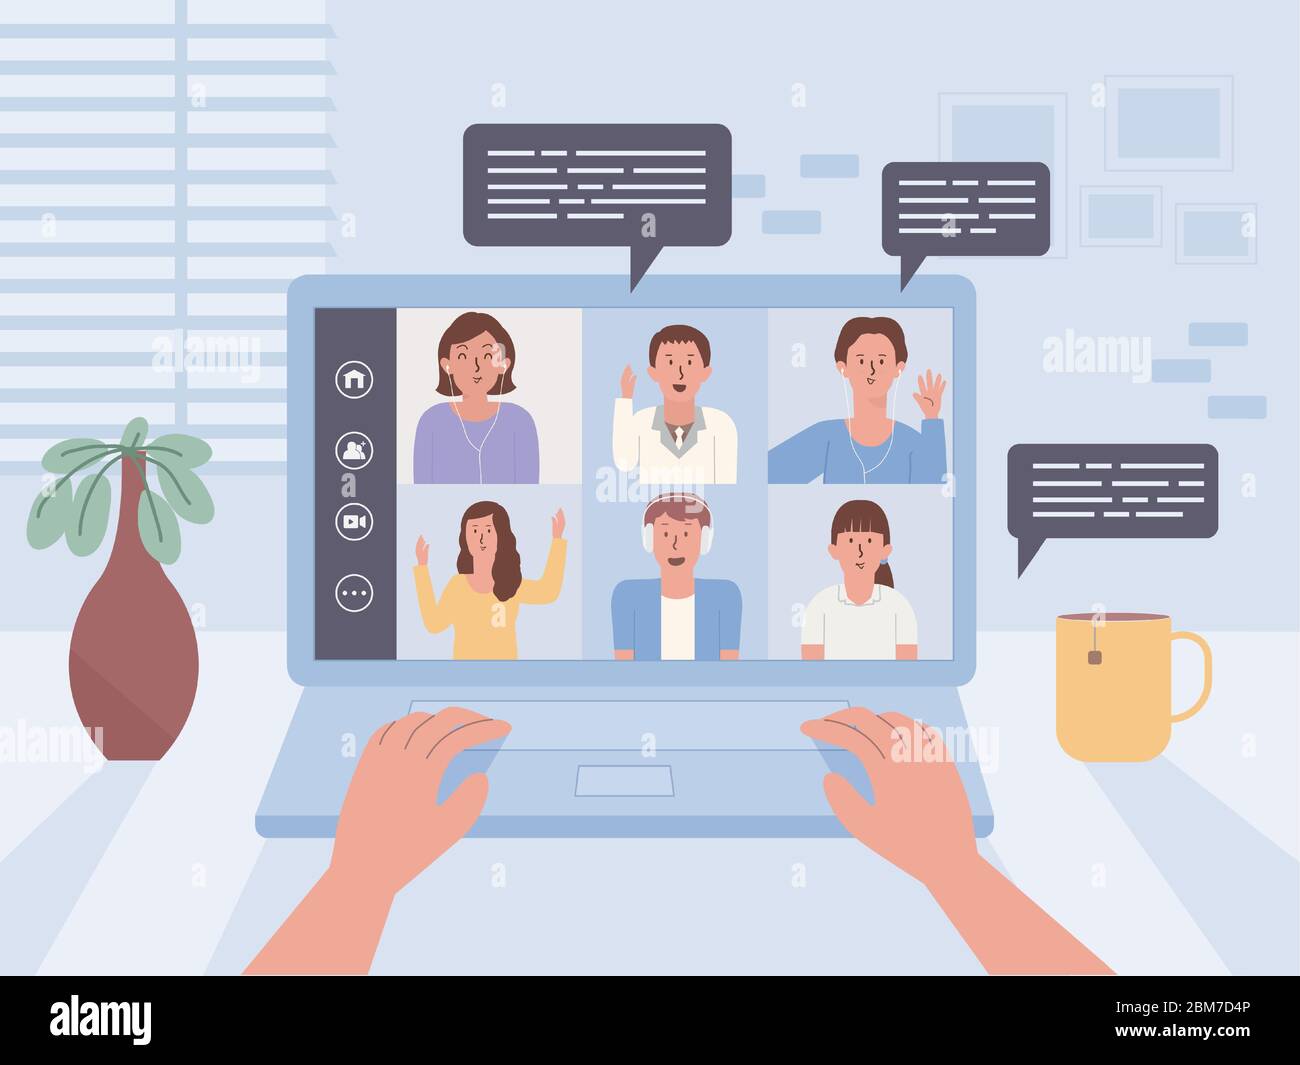 Hand of people using laptop on a table to connect other people in a video conference. Illustration about online meeting with communication technology. Stock Vector